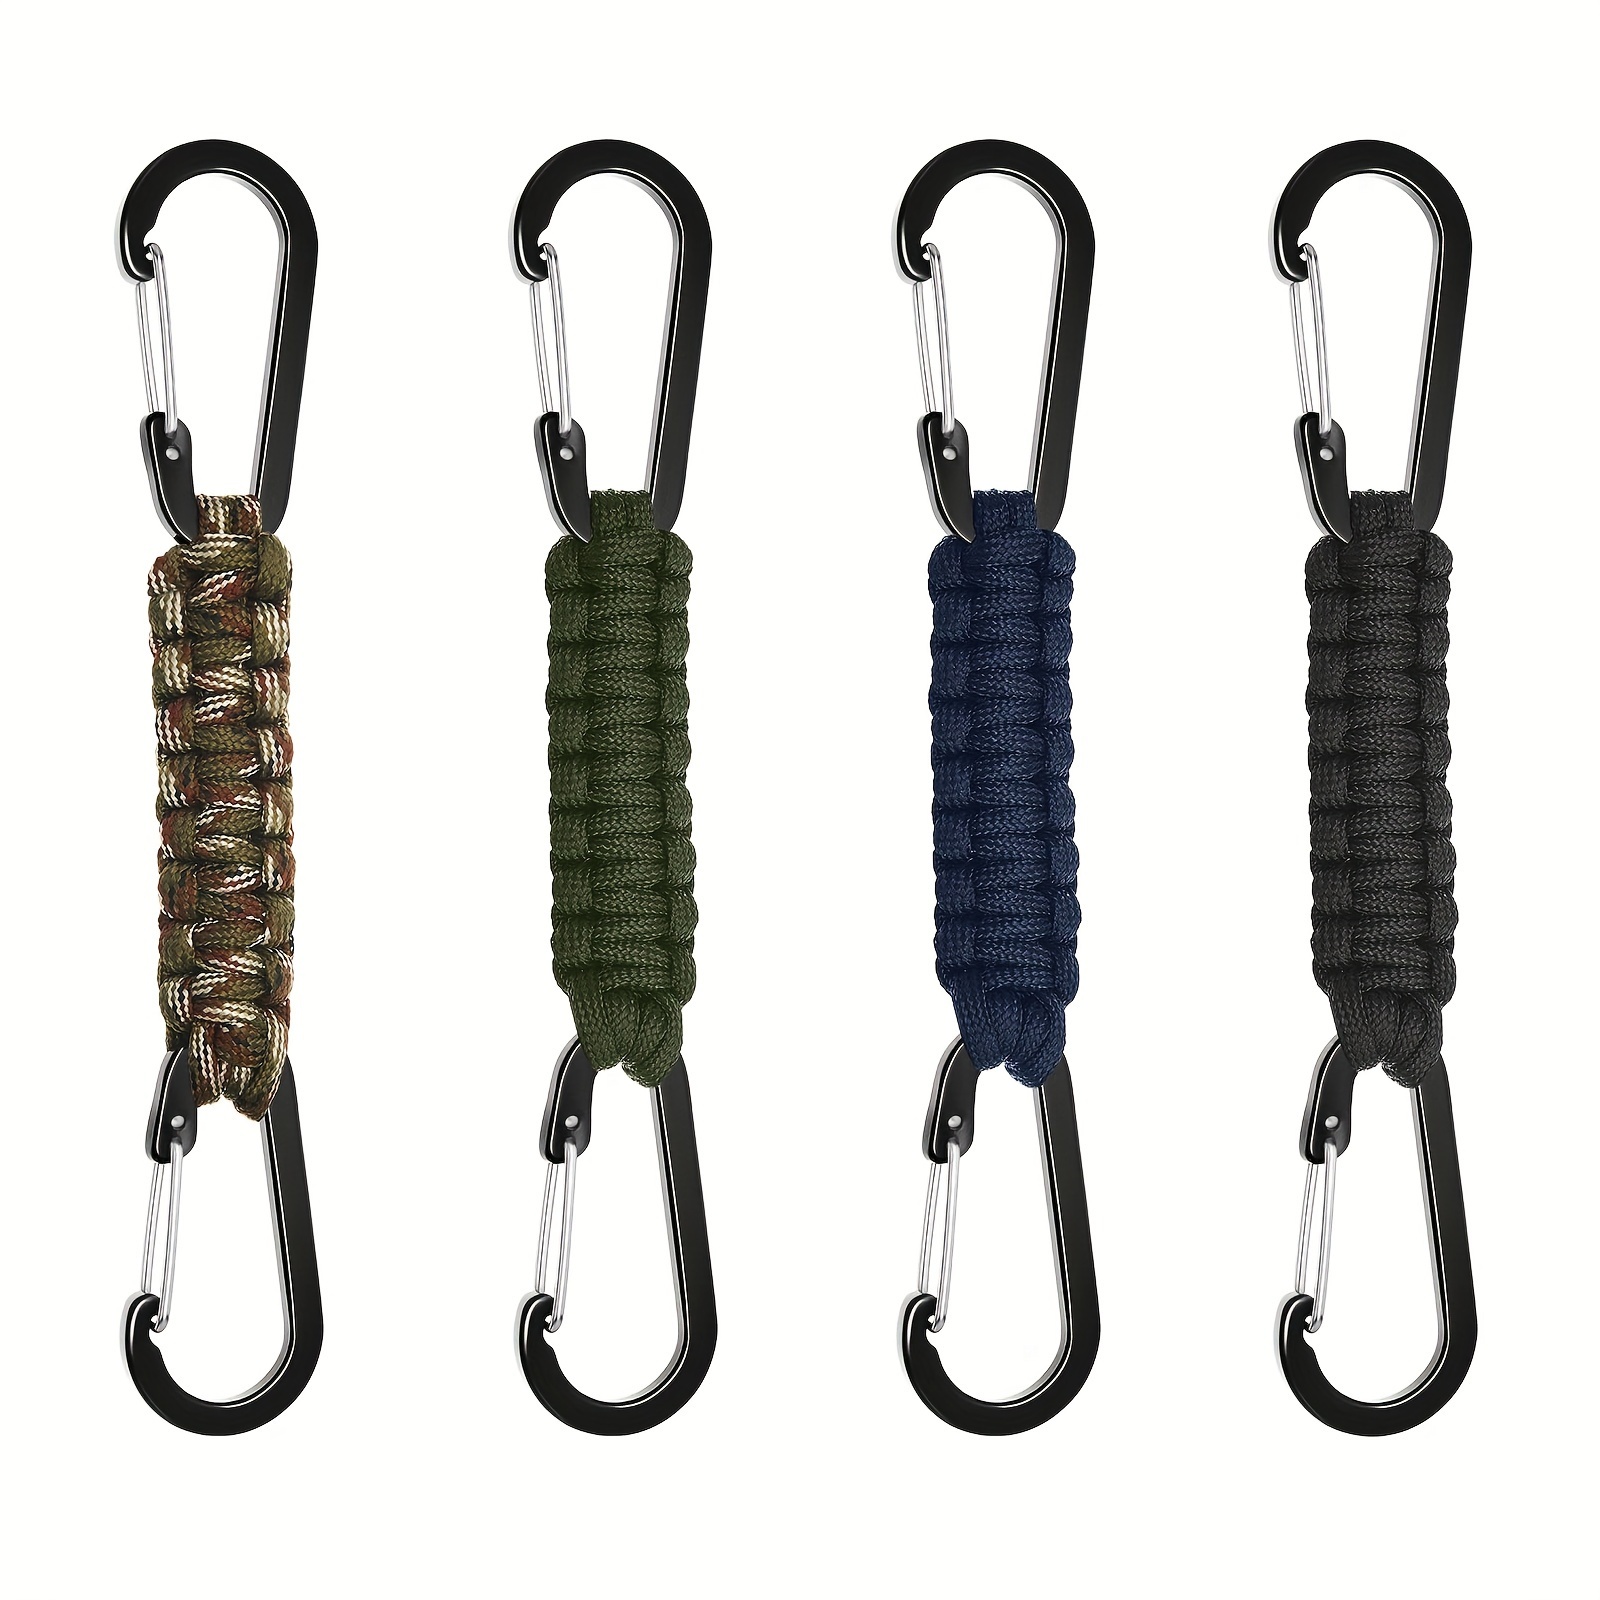 Strap Backpack Clips Keychain Carabiner Clips Double Hook Paracord